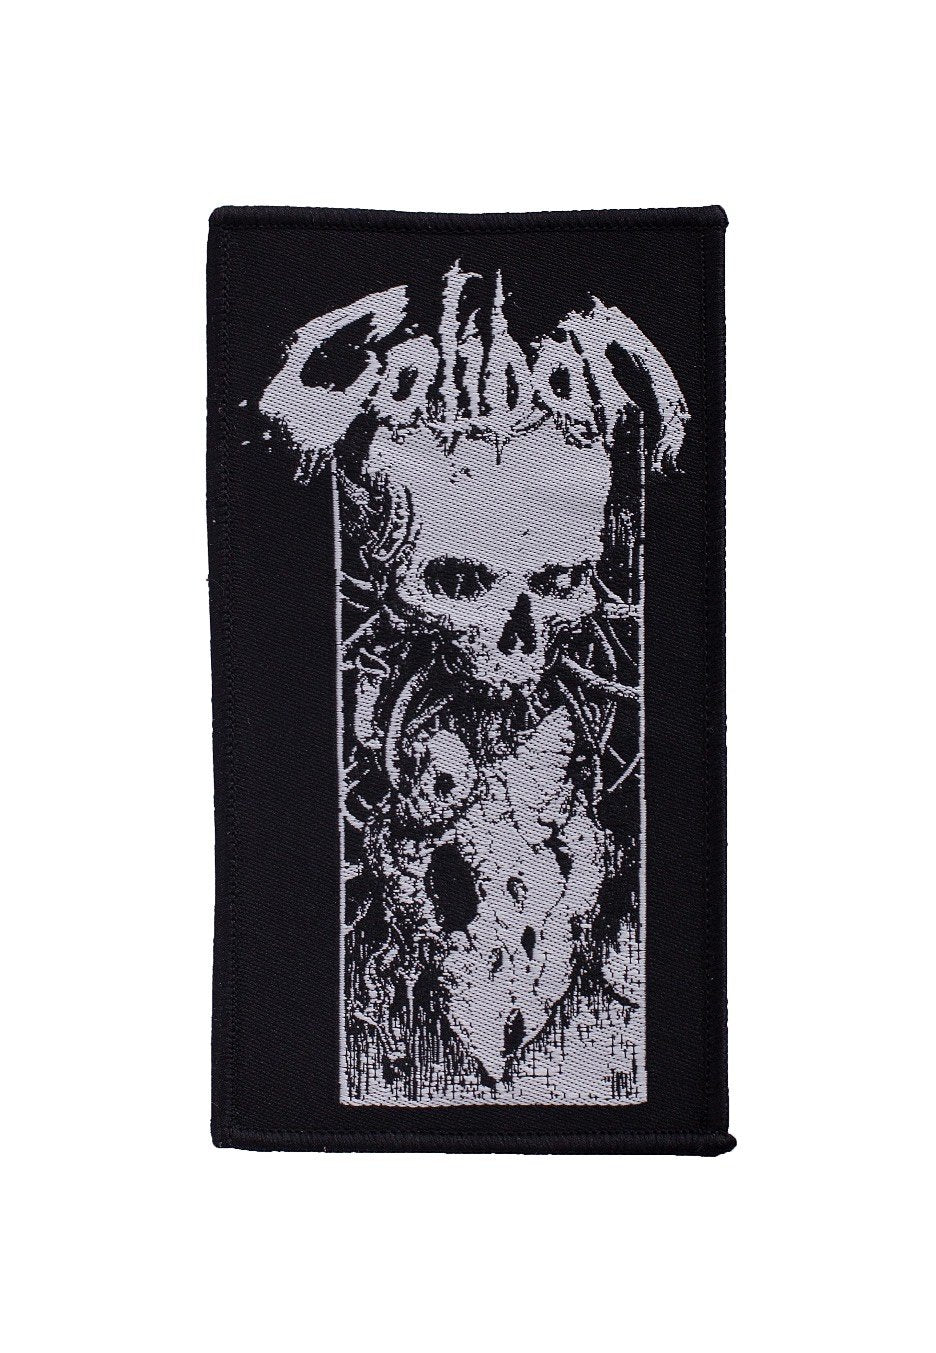 Caliban - Heart Out - Patch